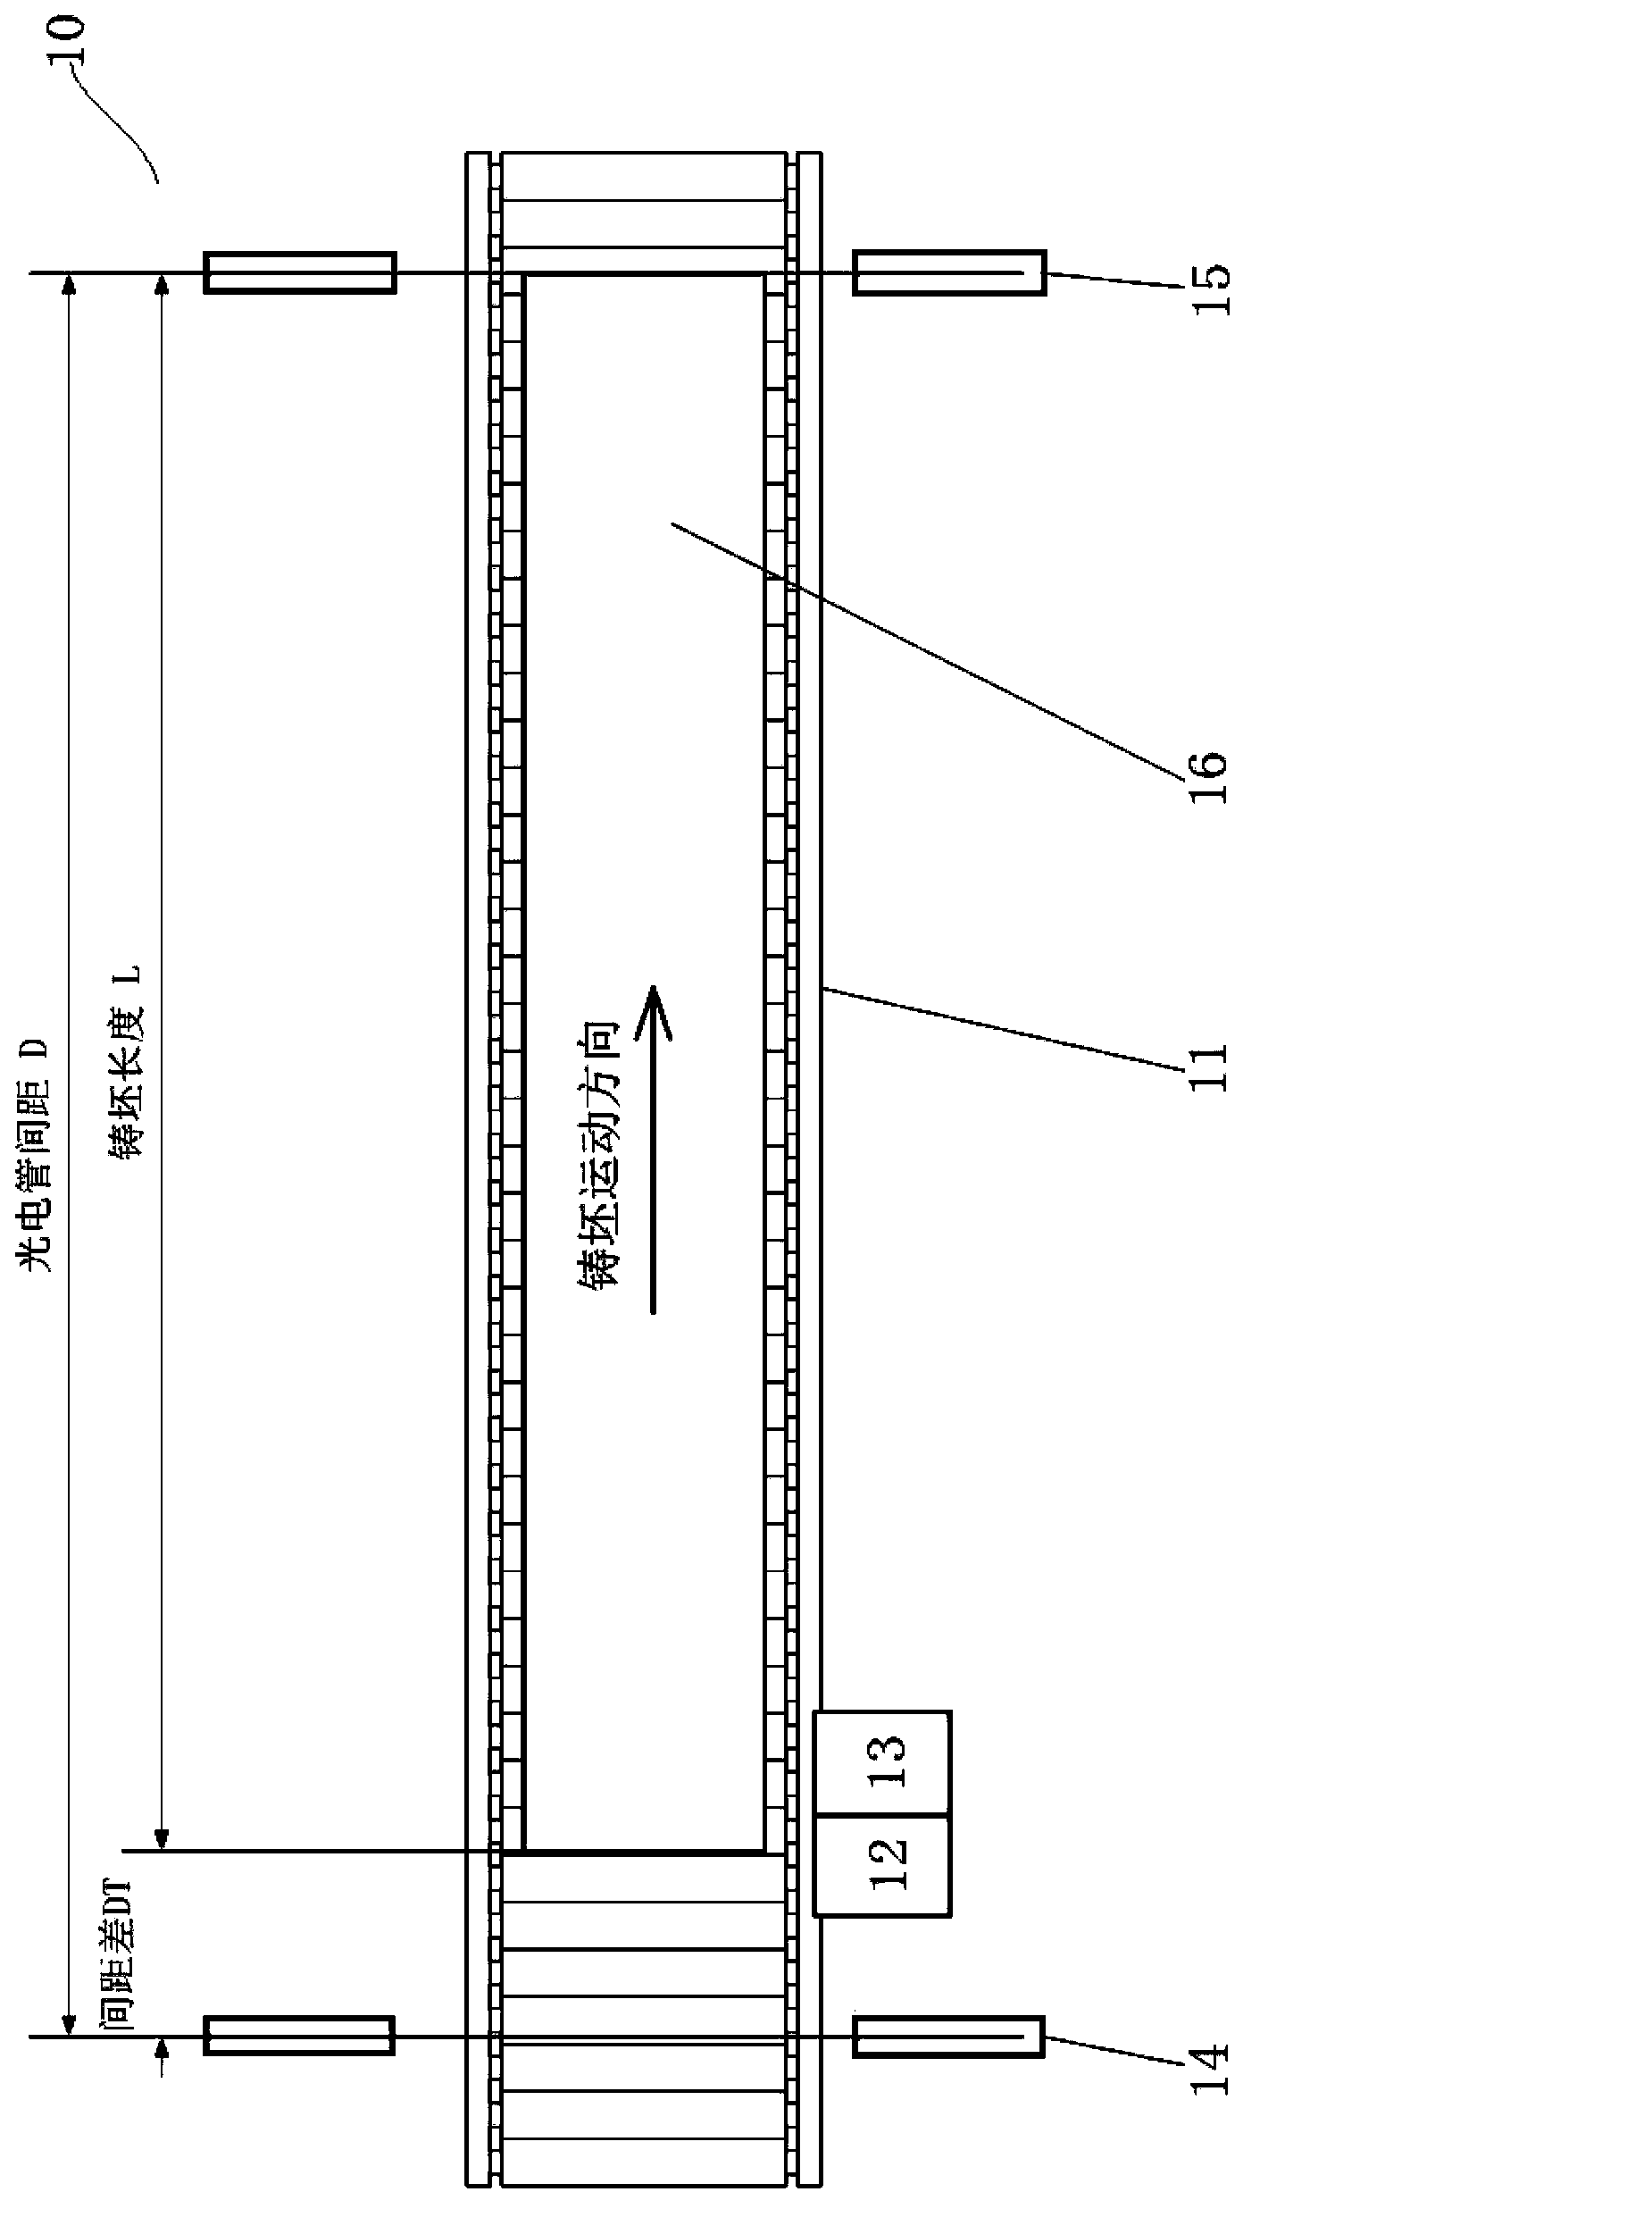 Casting blank length precision measuring device and method